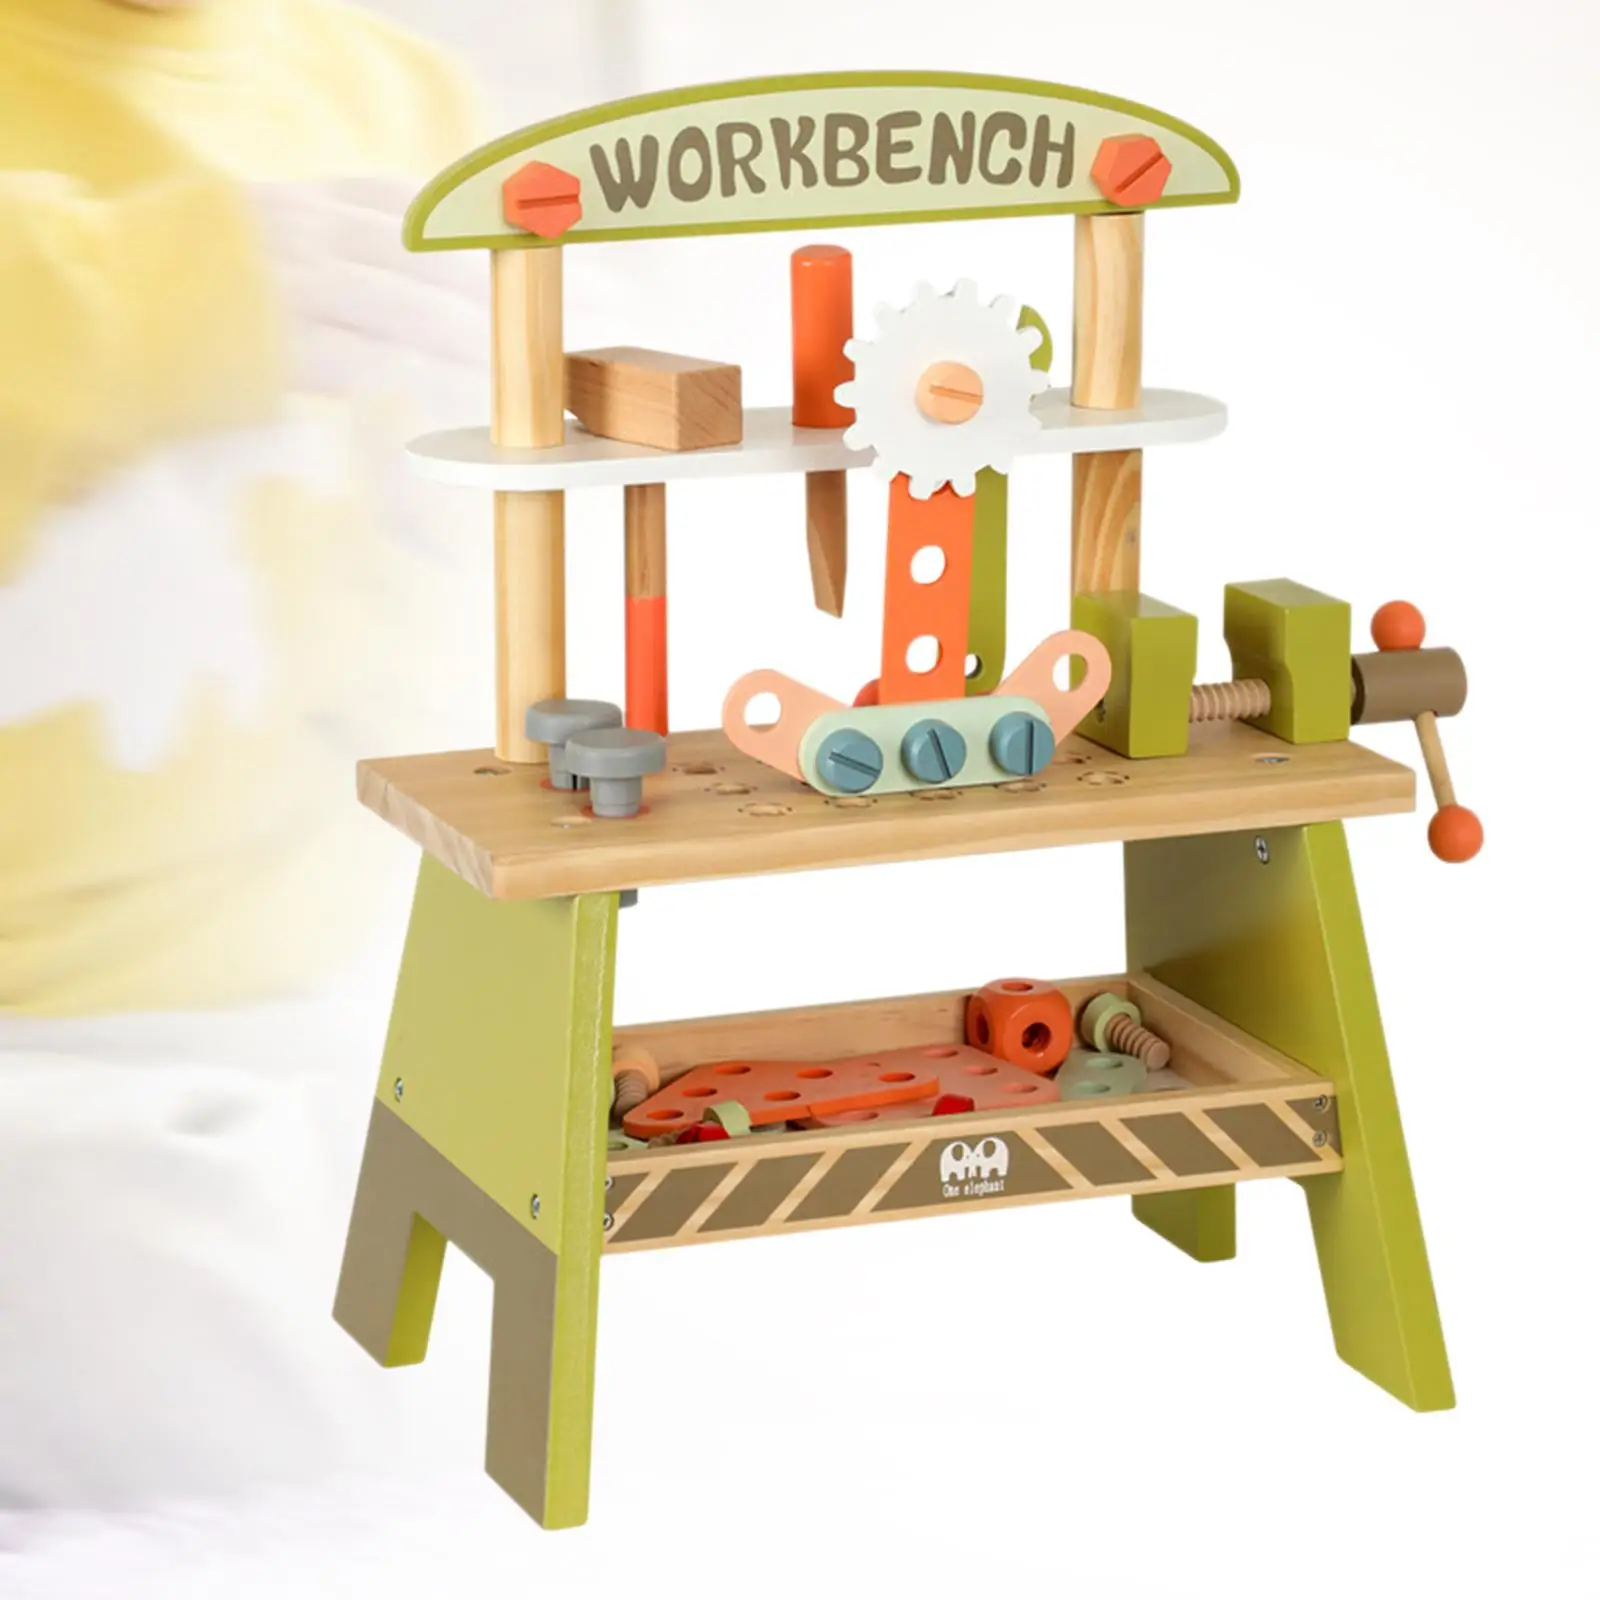 Small Wooden Kid Workbench Toy DIY Playset Creative Children Repair Play Tool Set for Ages 3+ Girls Boys Child Holiday Present